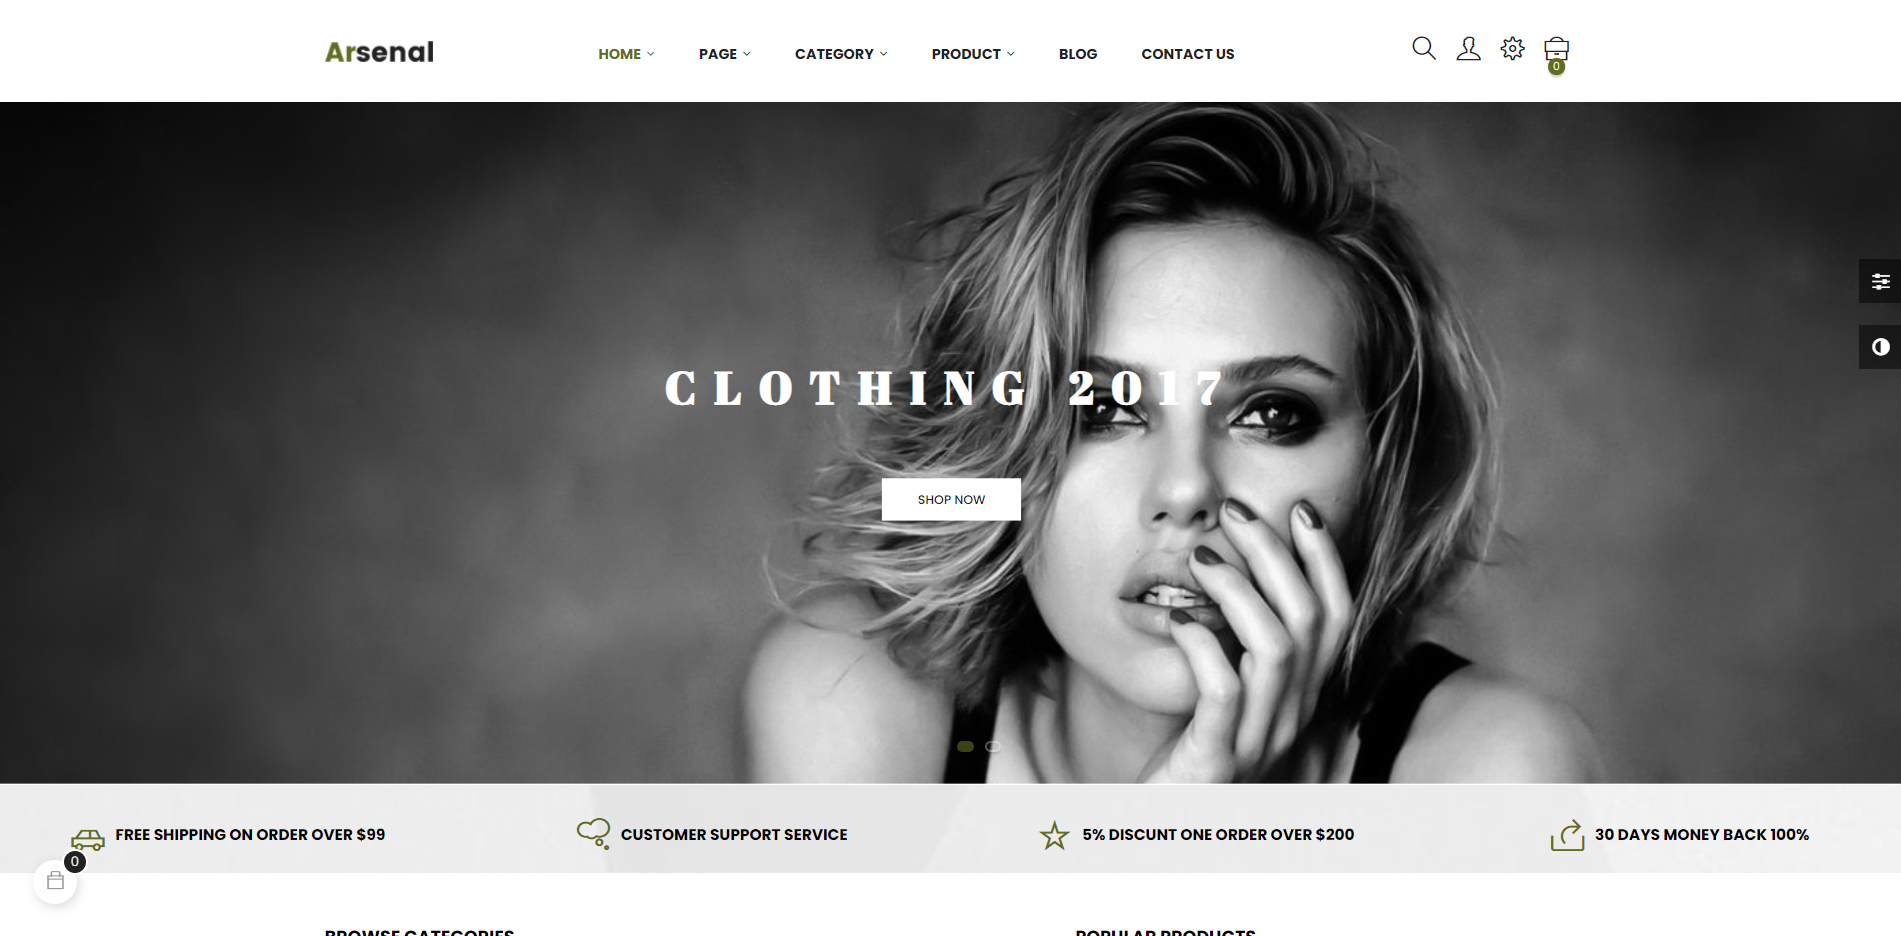 Arsenal Fashion Shoes and Accessories store Prestashop template